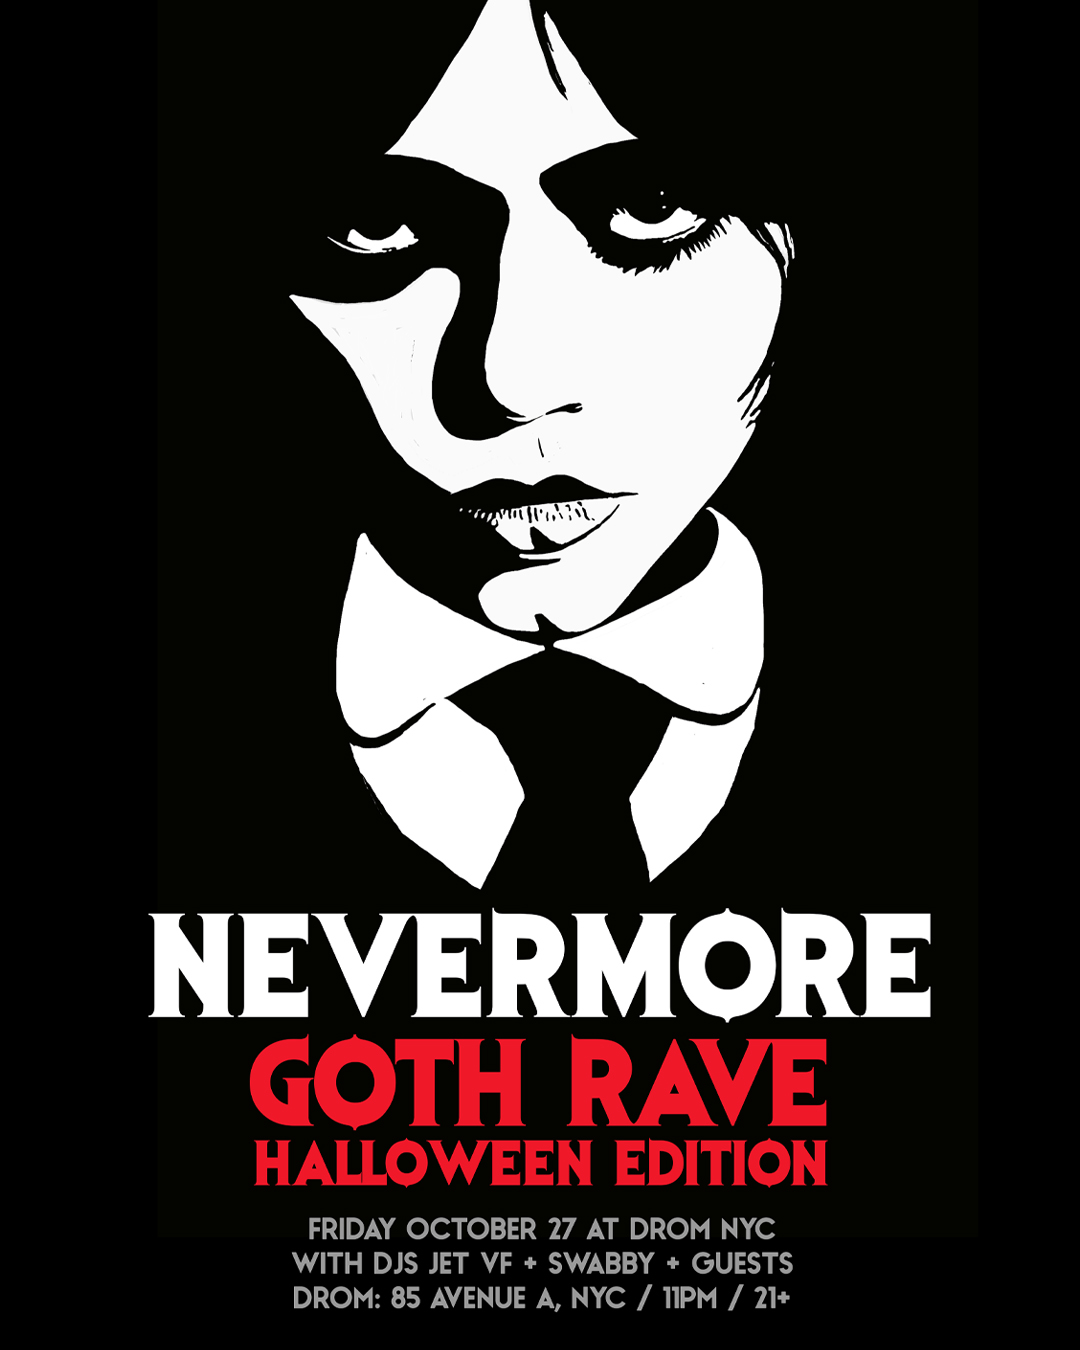 Nevermore Goth Rave